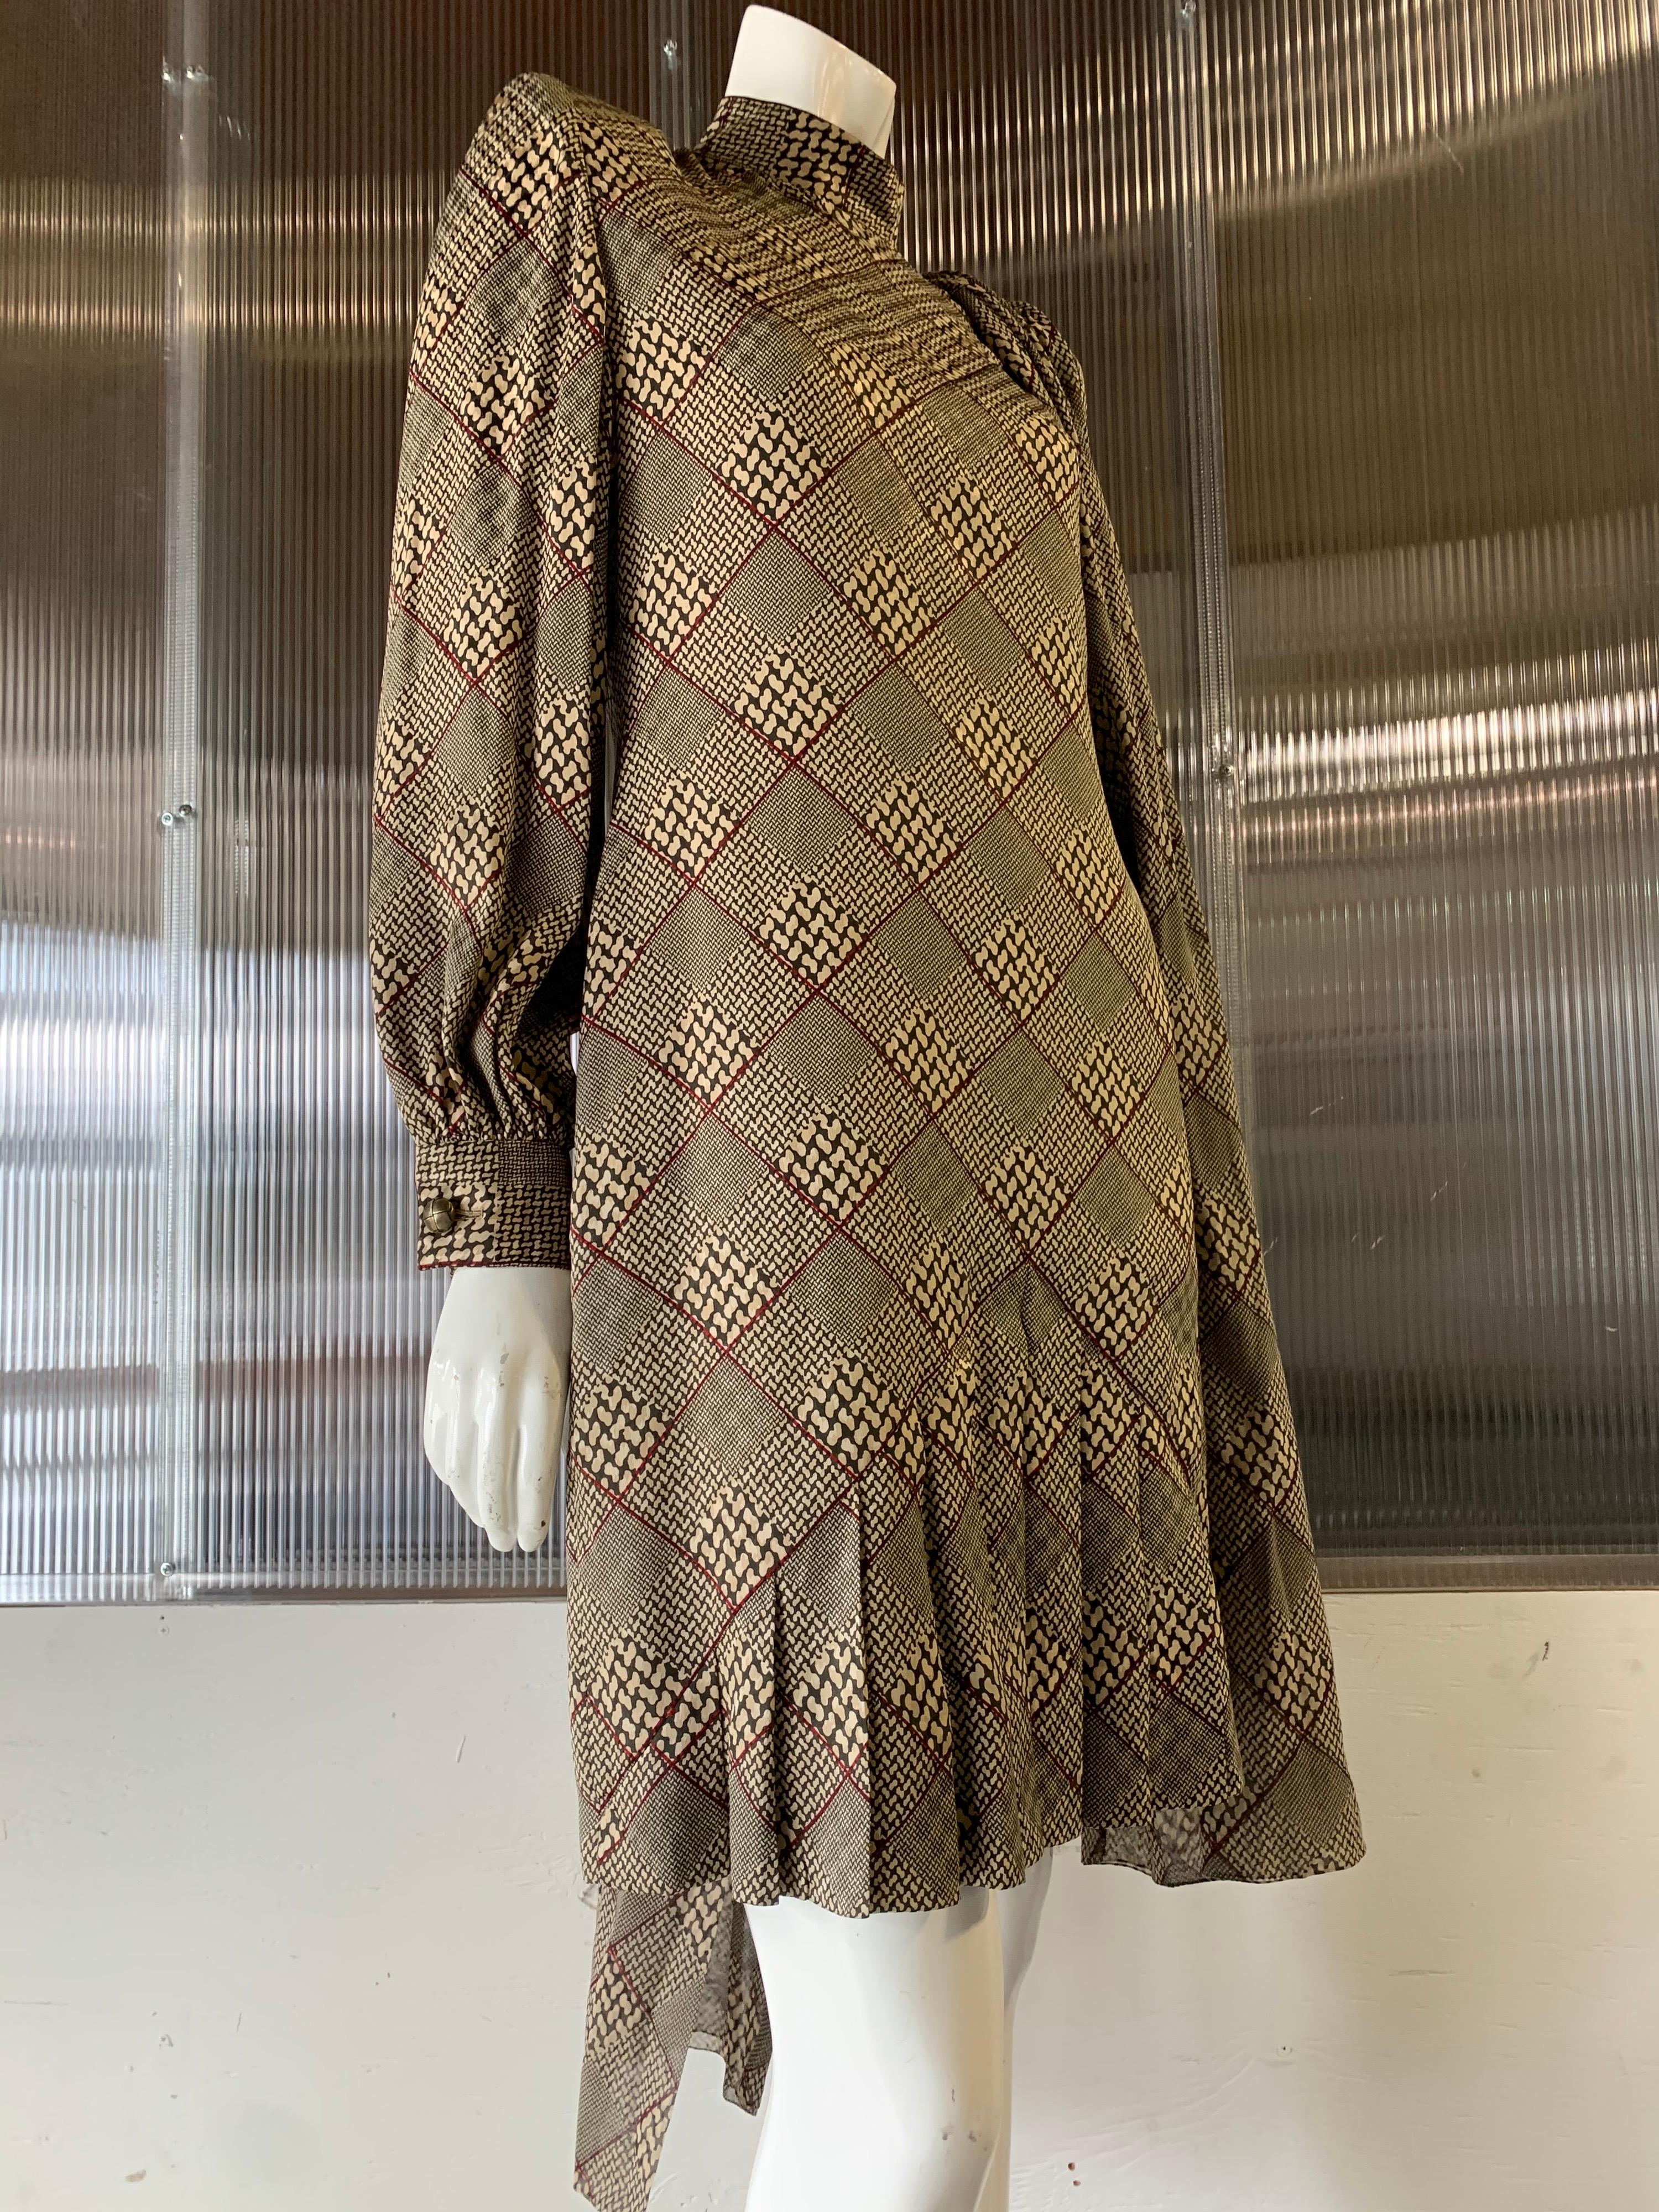 1980s Galanos Silk Dress in a Hounds Tooth Plaid W/ Matching Wool Jacket & Scarf For Sale 6